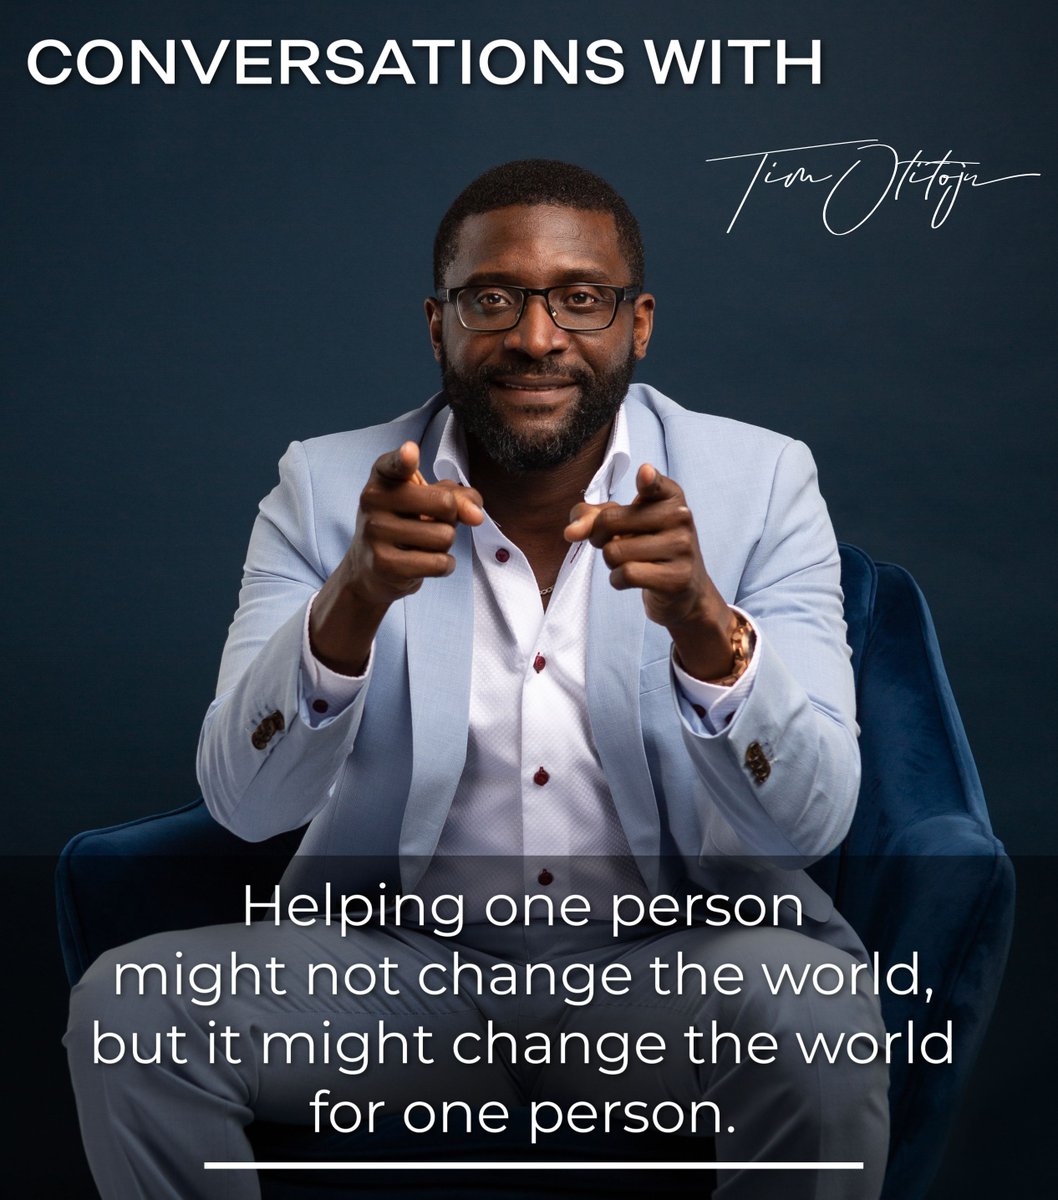 Helping one person, even in a small way, can profoundly impact their world. Acts of kindness create a ripple effect, offering hope, restoring faith, and inspiring gratitude. 

#conversationwithtimotitoju #kindnessmatters❤️ #actsofkindness #changetheworld